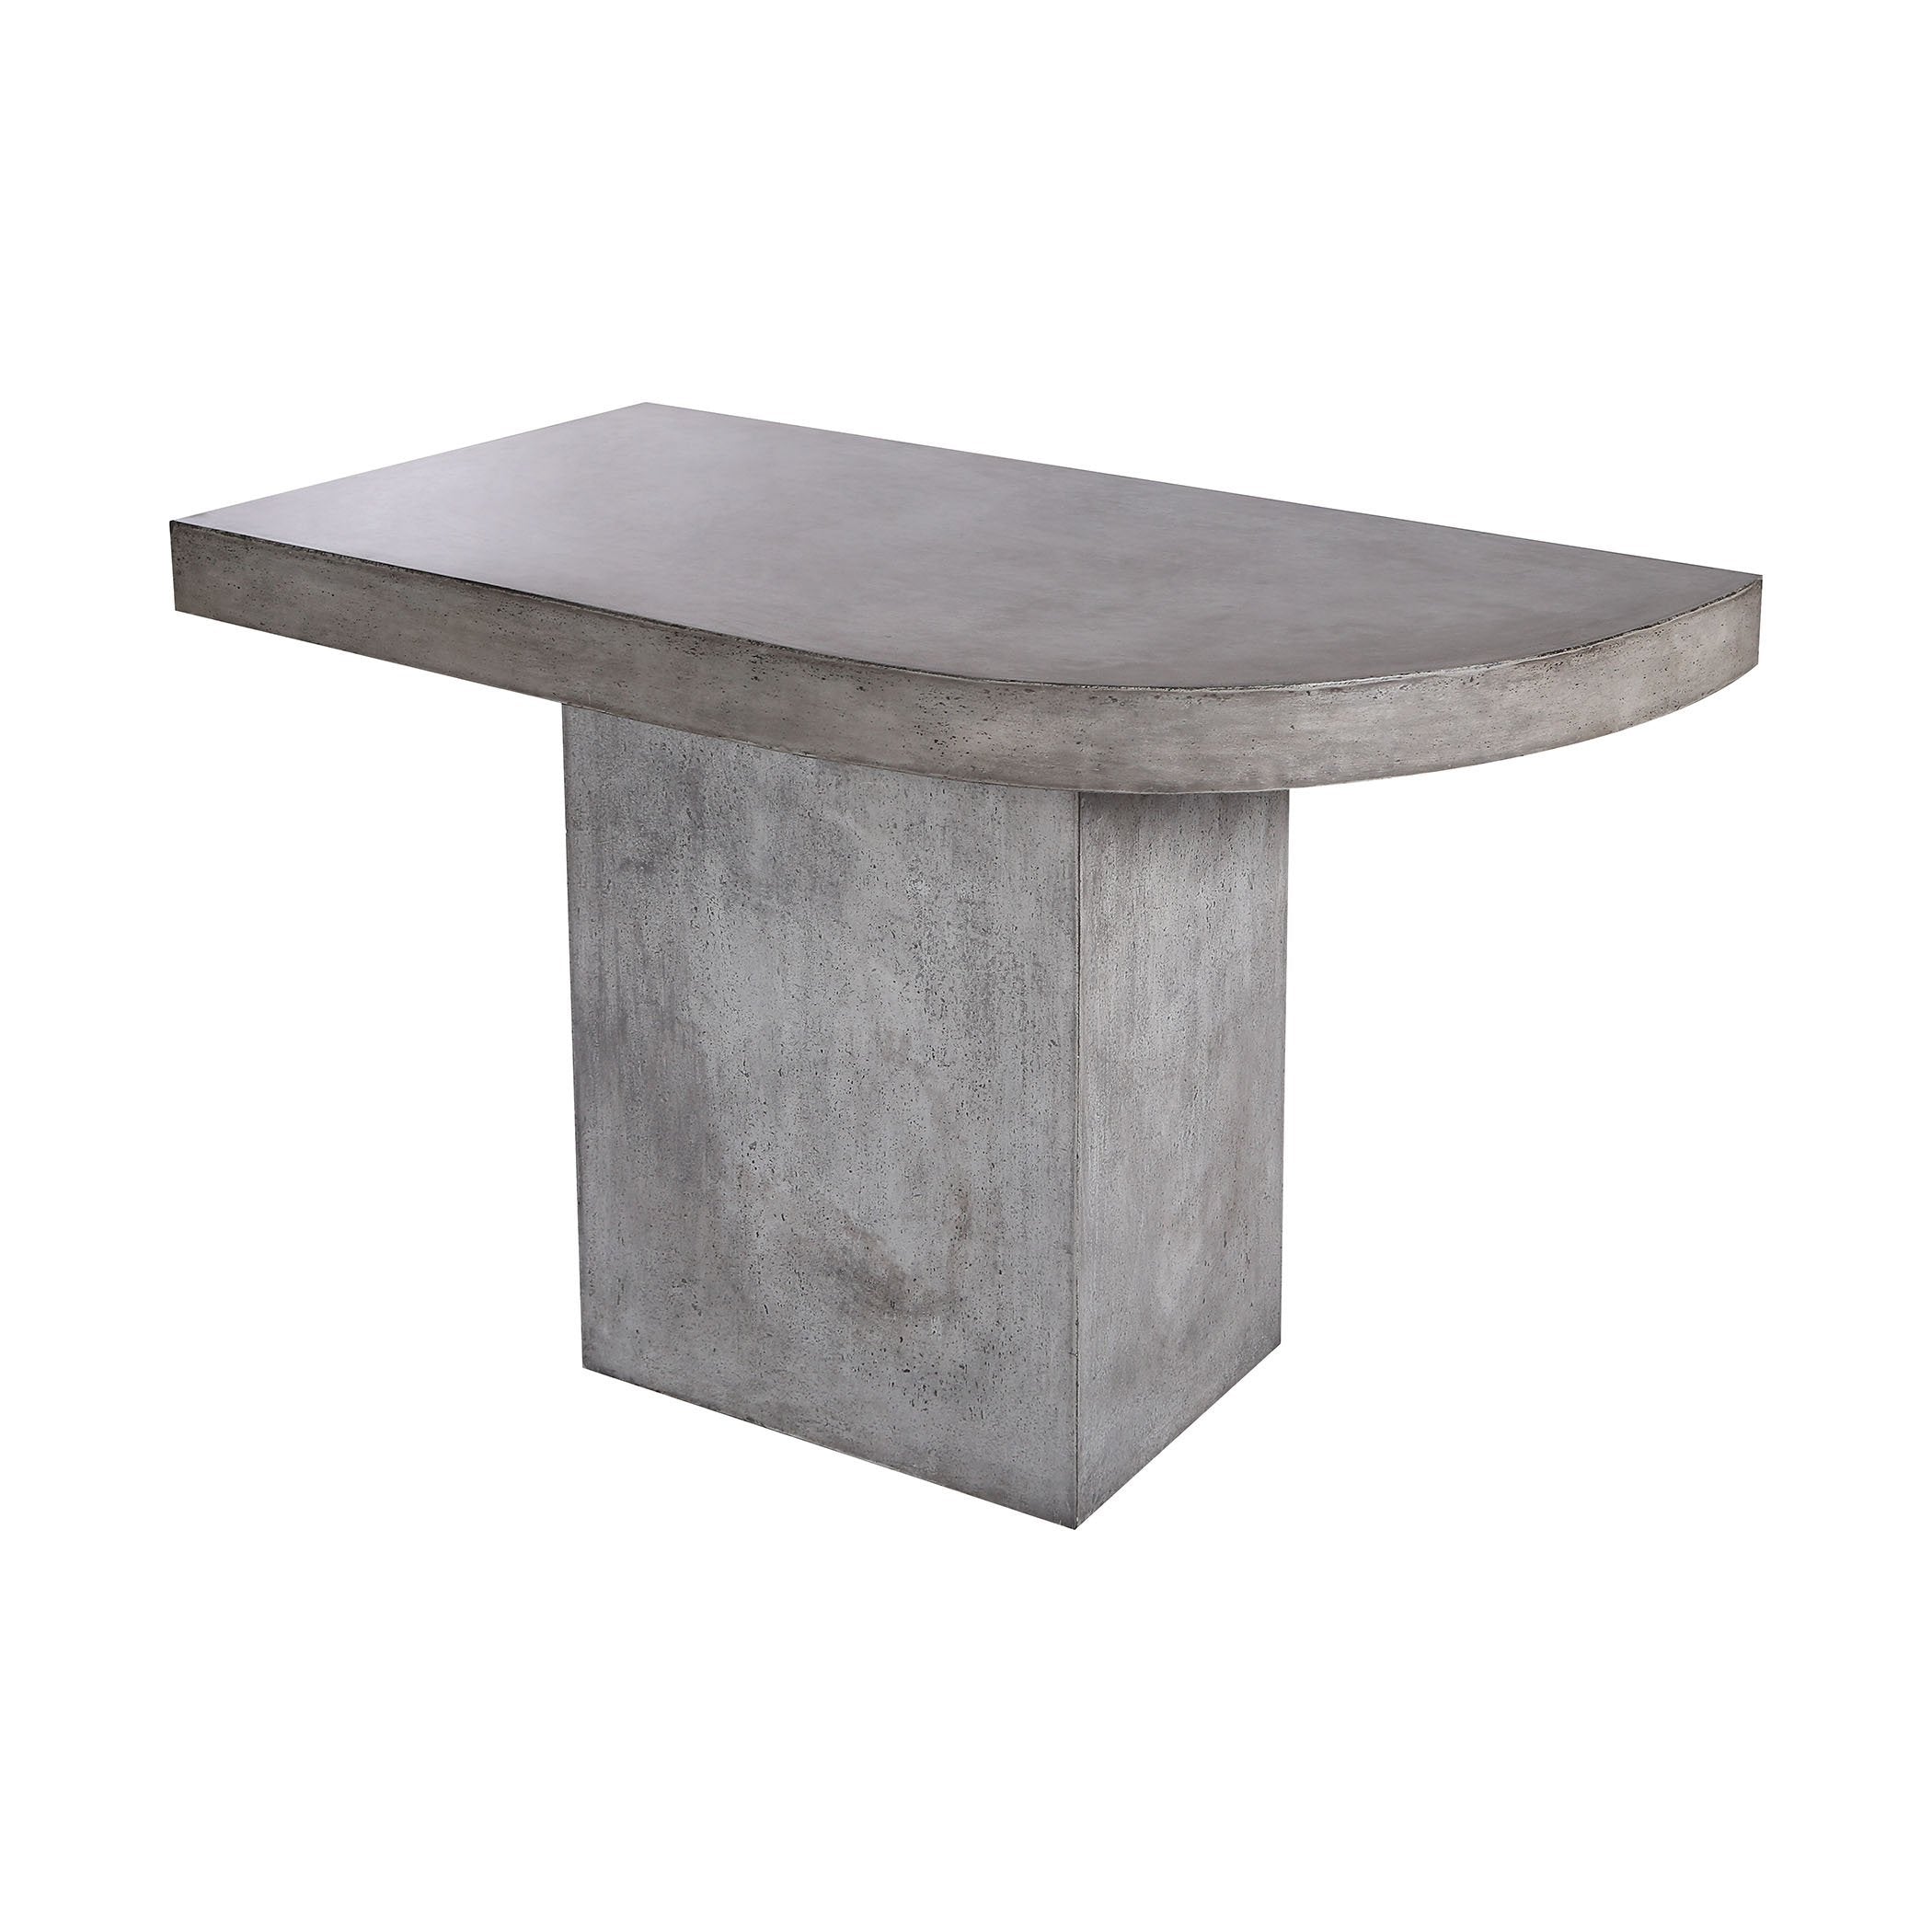 Millfield Concrete Outdoor Dining Table - Right Side Furniture Dimond Home 